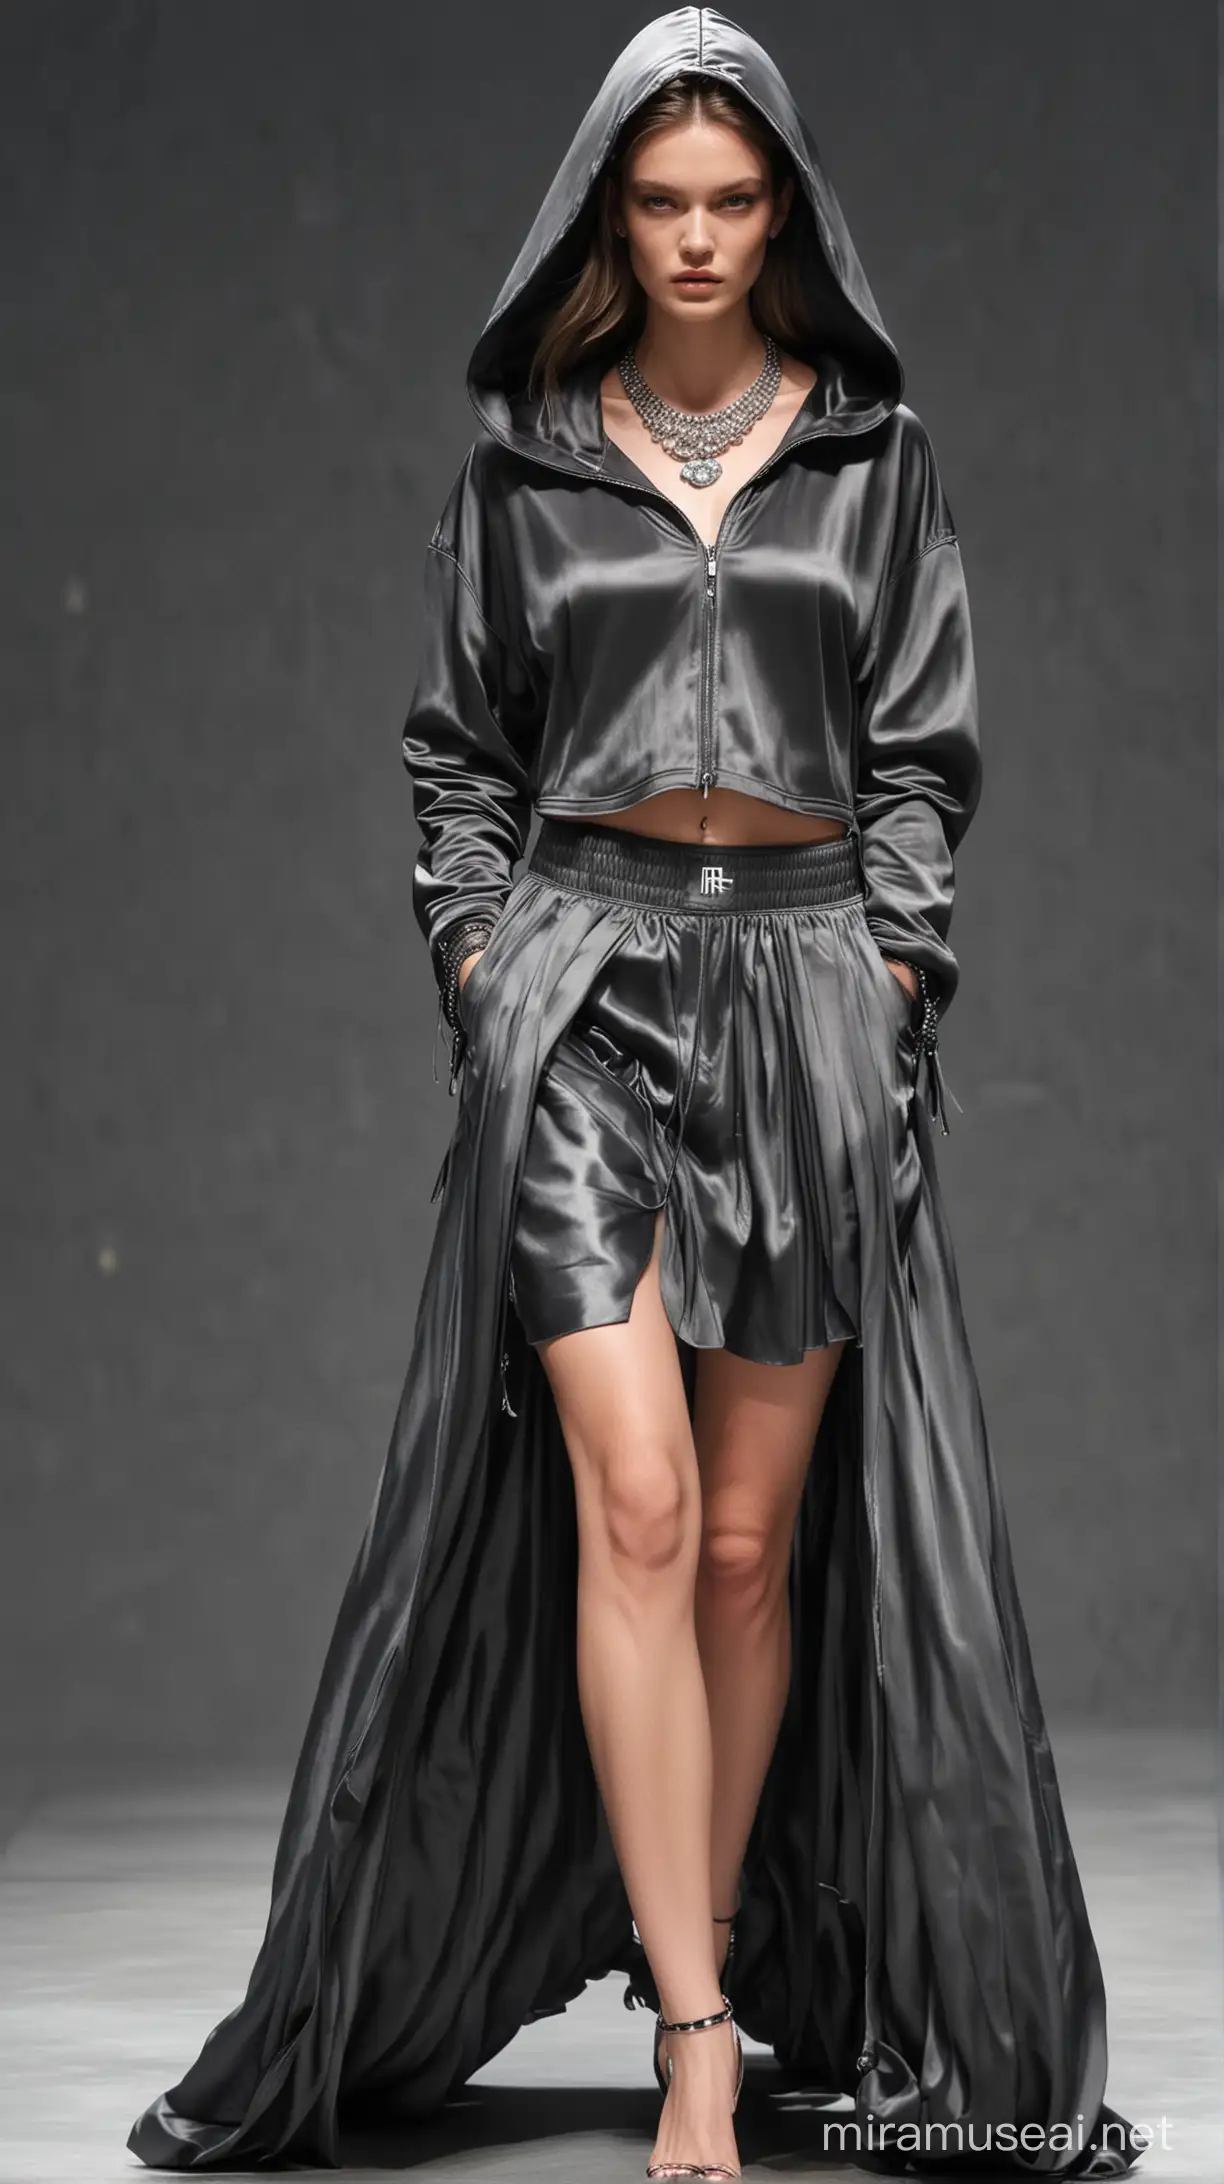 Stunning supermodel runway motion, front angle, wearing a washed satin crop oversized hooded top and long flowy layered skirt and jewelry, charcoal glam, hyper-realistic, Prada style 